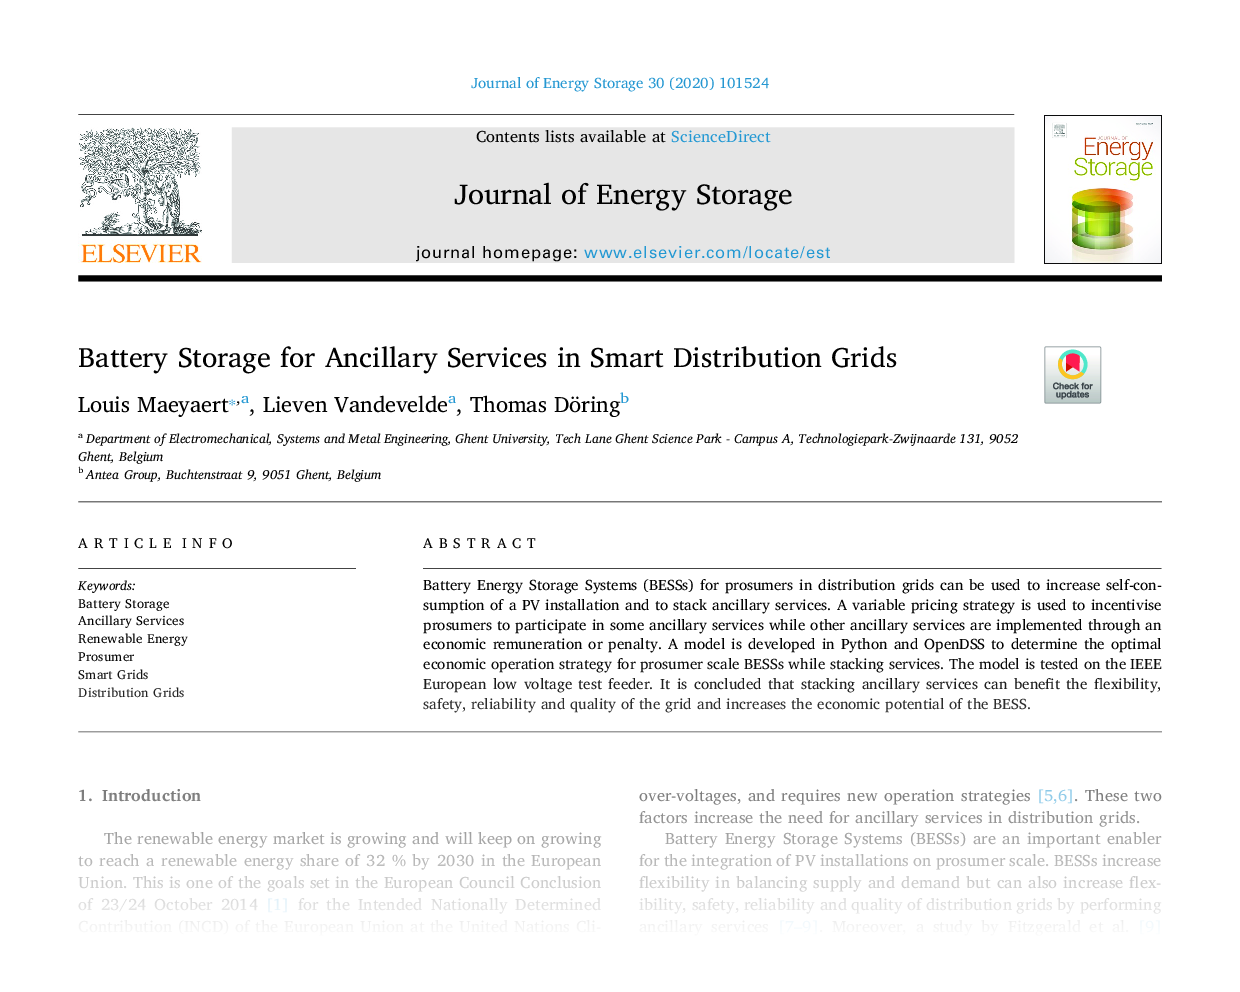 Battery Storage for Ancillary Services in Smart Distribution Grids